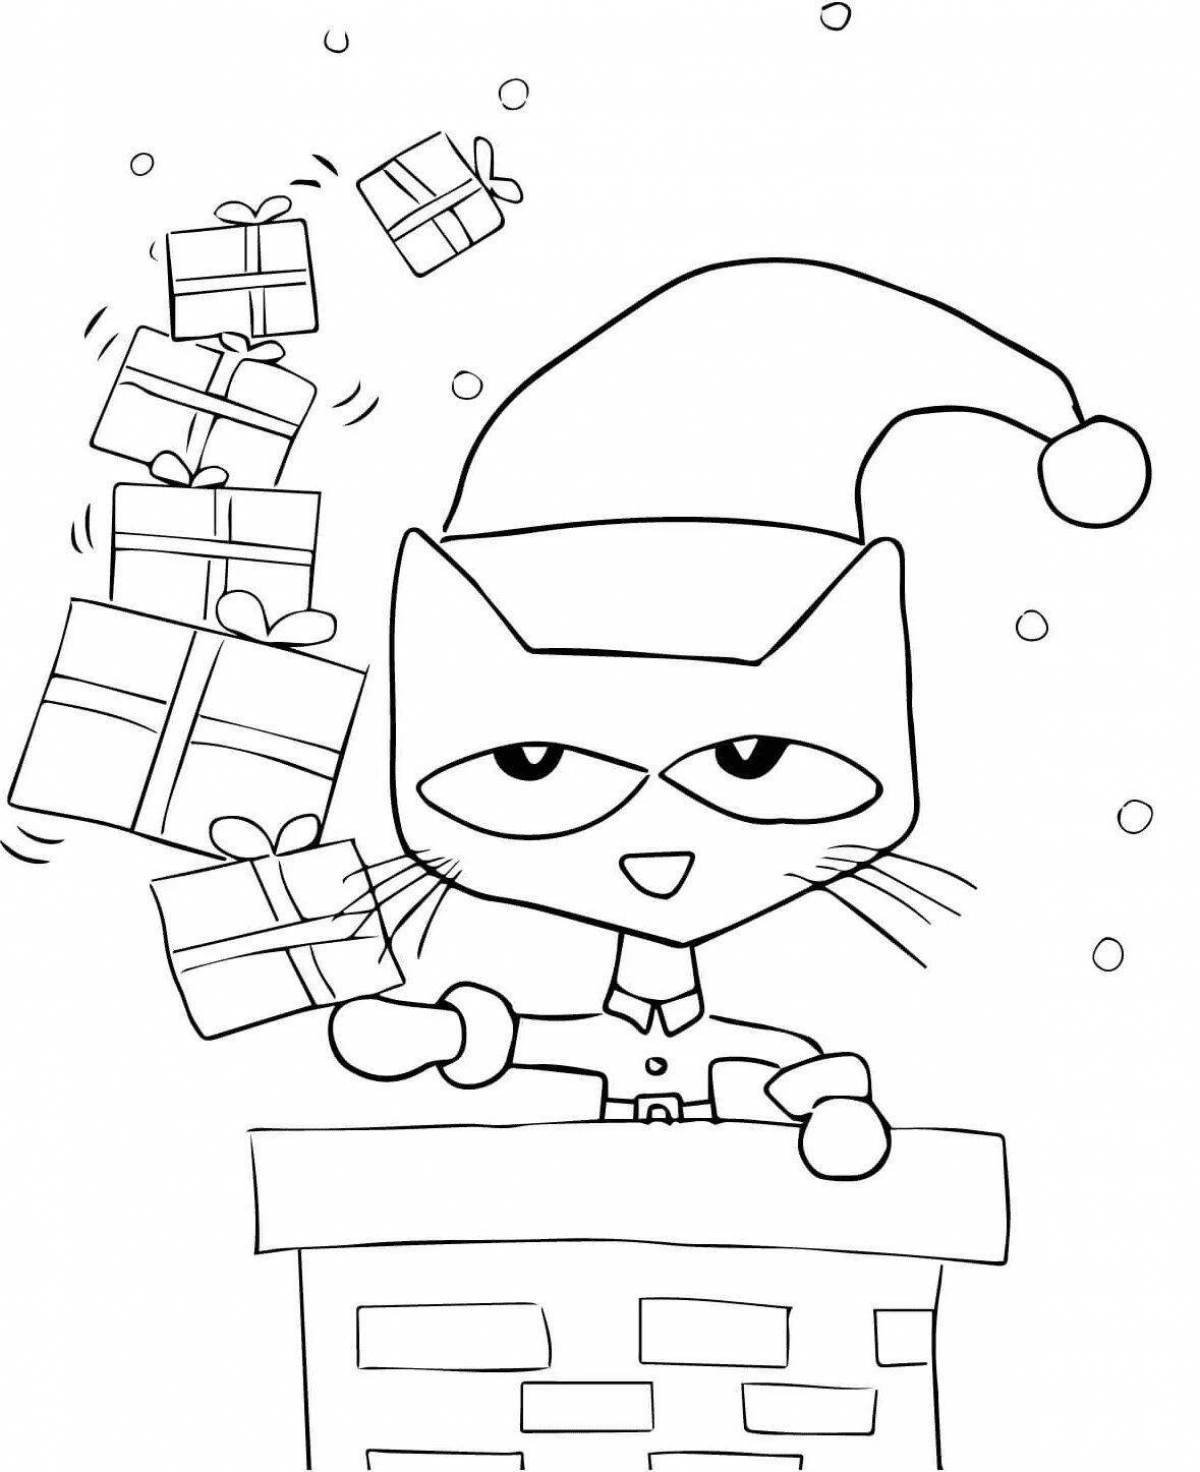 Coloring page happy cat in a hat